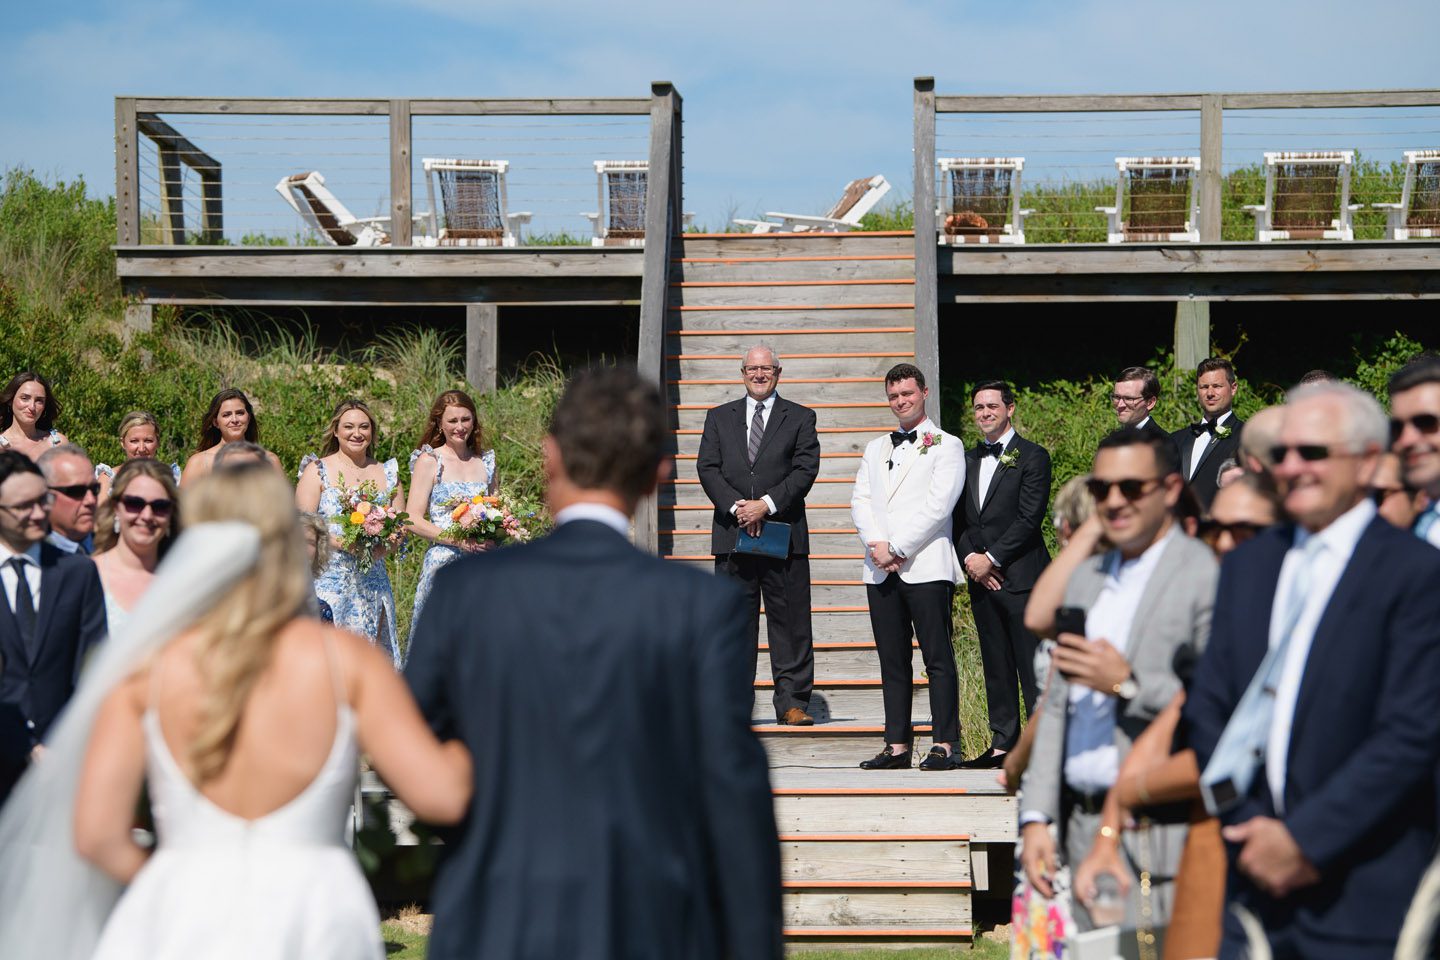 Groom looking on as the bride arrives at an Outer Banks wedding ceremony